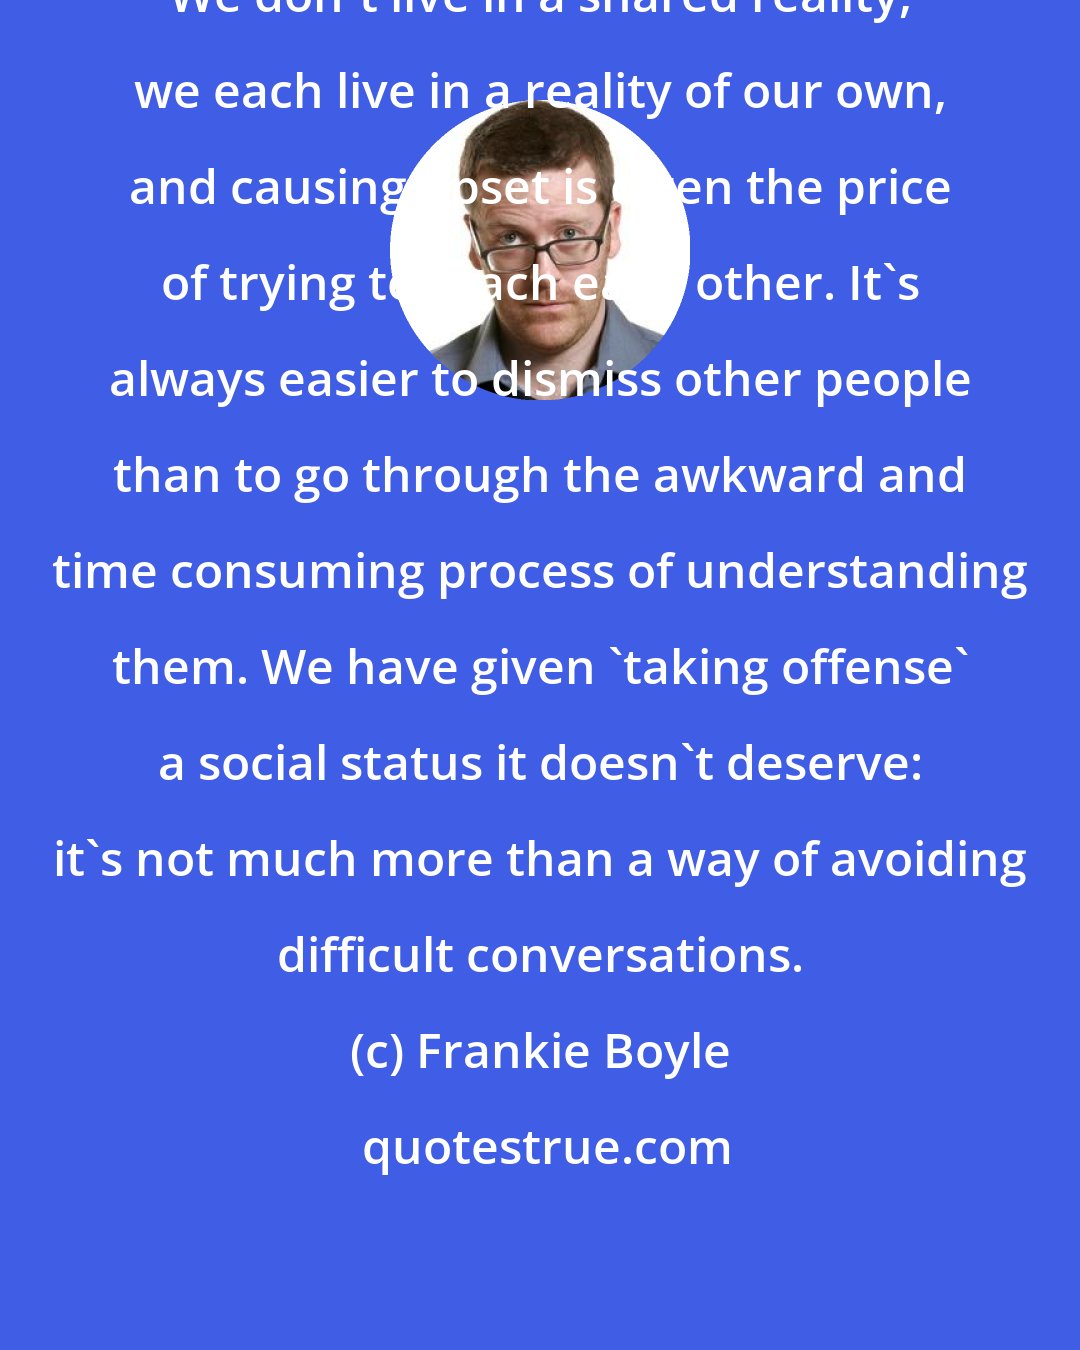 Frankie Boyle: We don't live in a shared reality, we each live in a reality of our own, and causing upset is often the price of trying to reach each other. It's always easier to dismiss other people than to go through the awkward and time consuming process of understanding them. We have given 'taking offense' a social status it doesn't deserve: it's not much more than a way of avoiding difficult conversations.